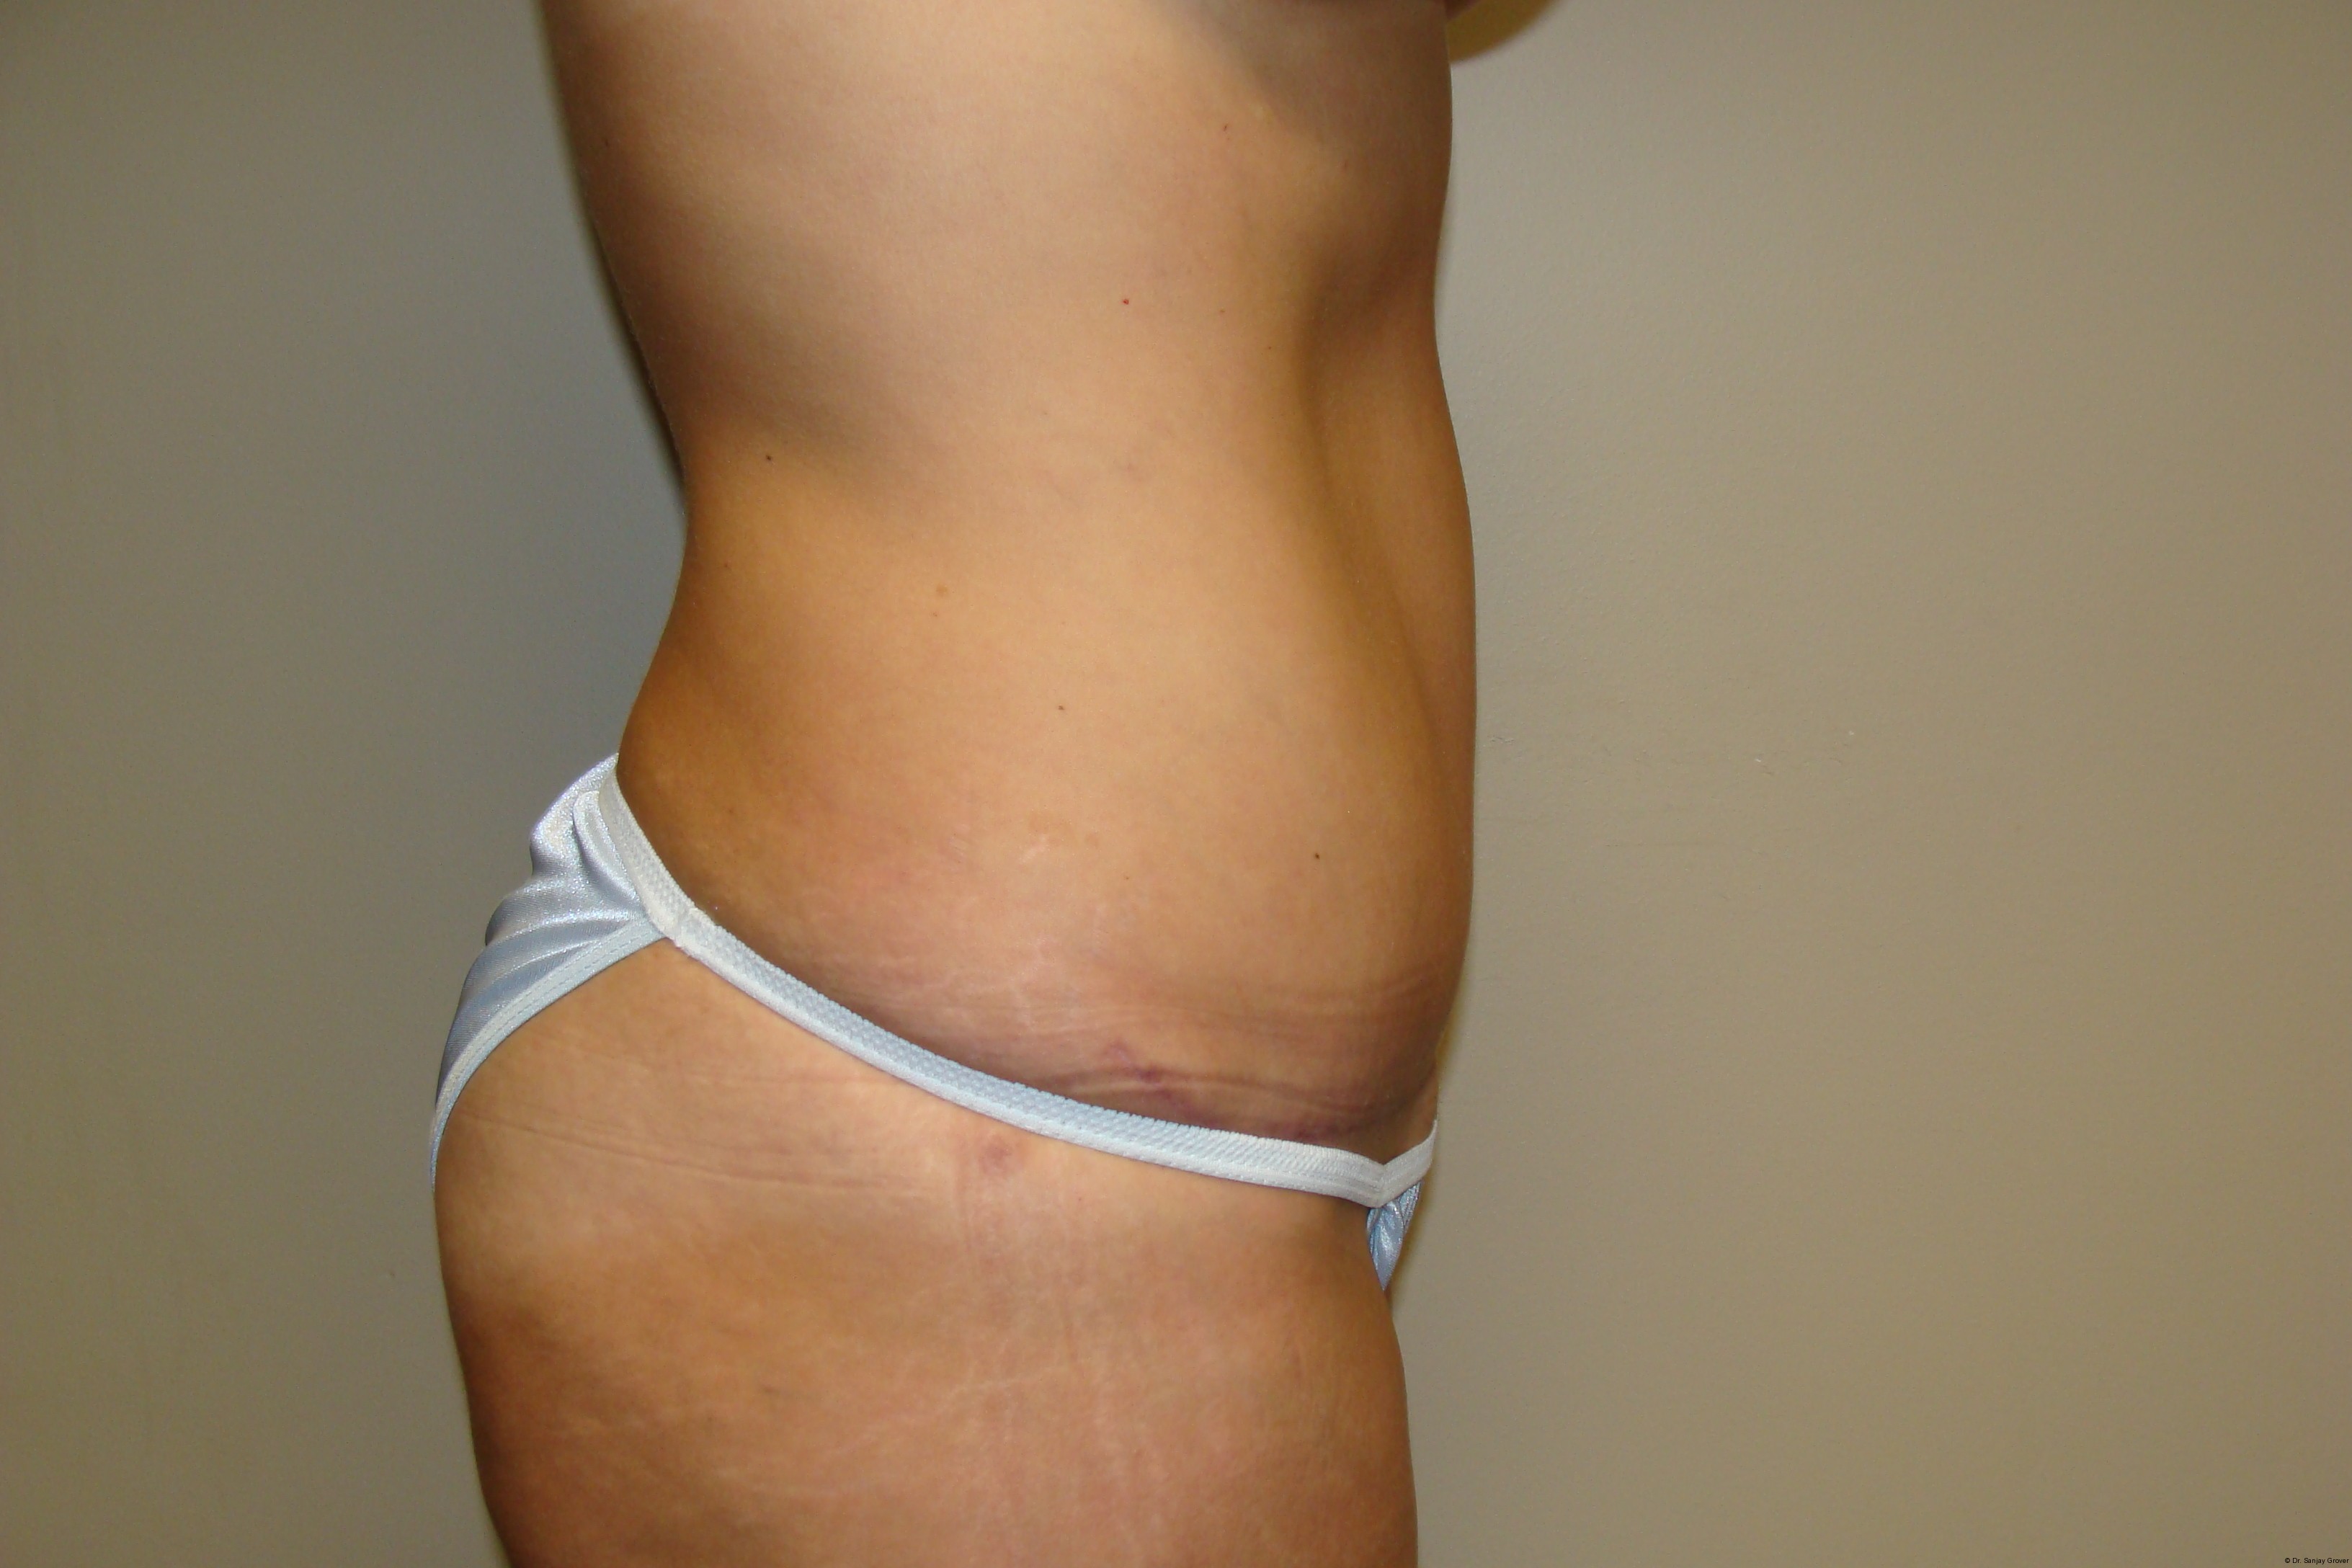 Tummy Tuck Before and After 23 | Sanjay Grover MD FACS